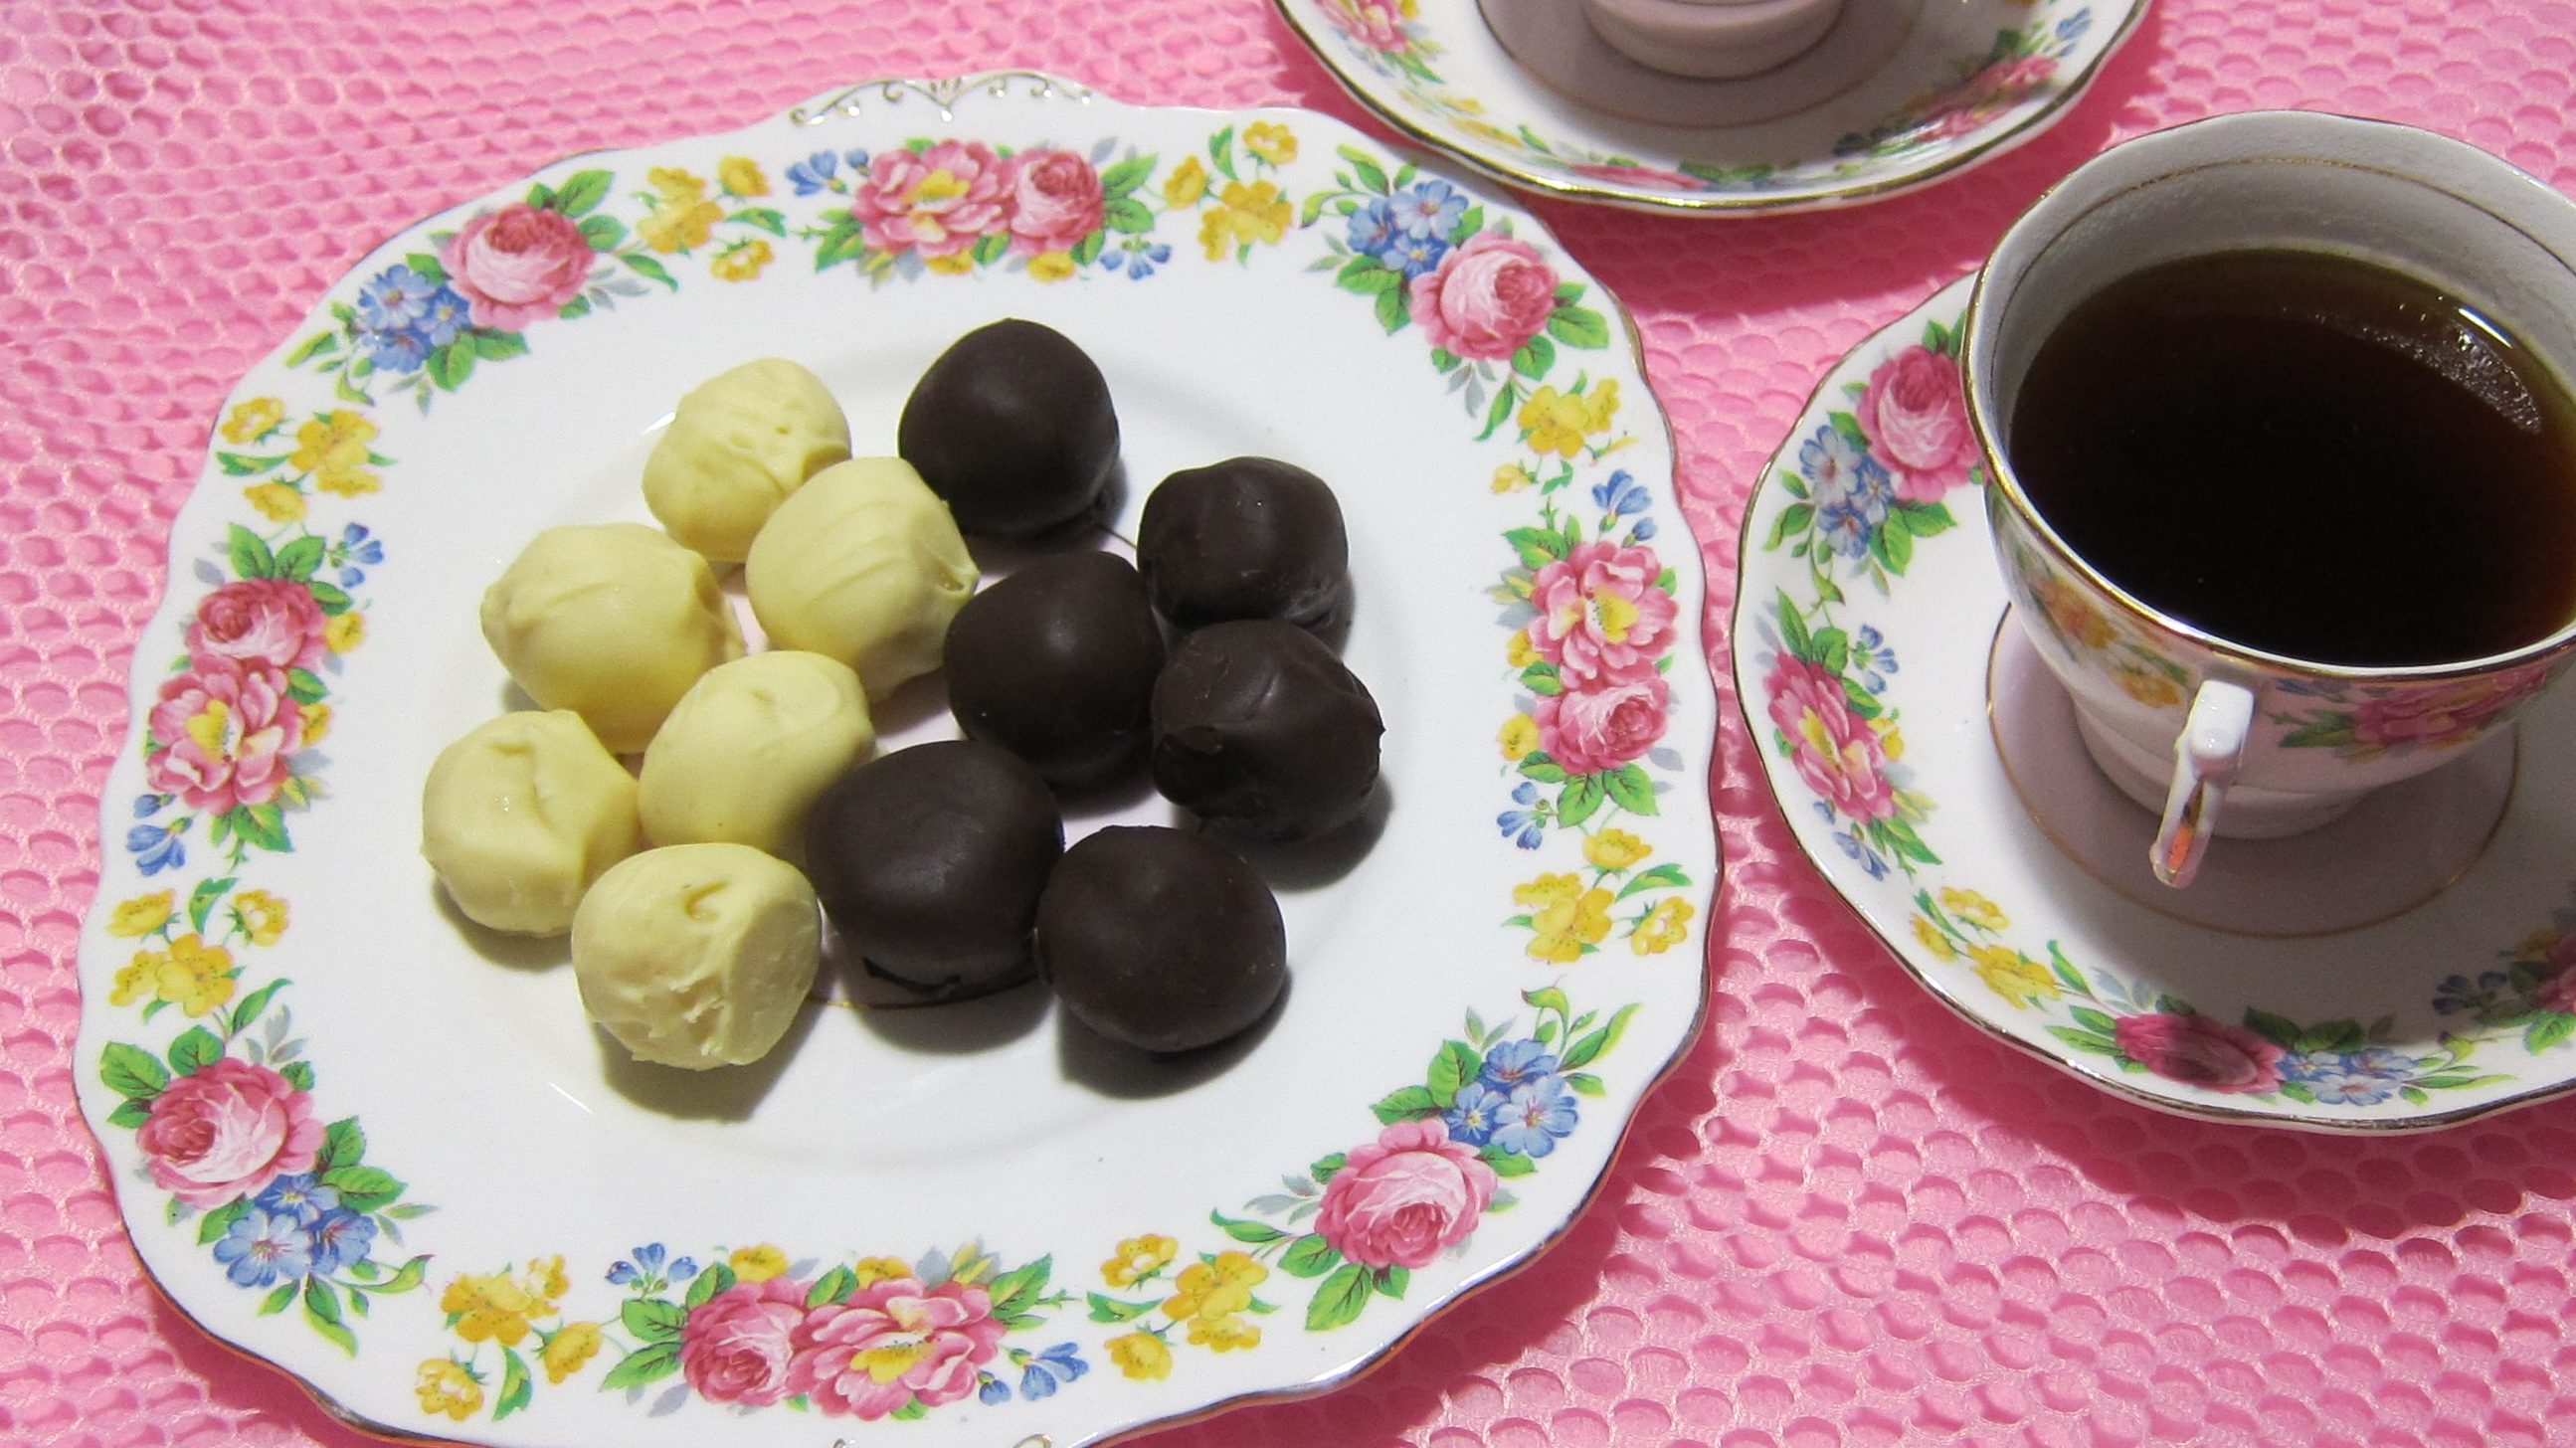 Dark chocolate and white chocolate truffles on a plate with two cups& saucers of tea.